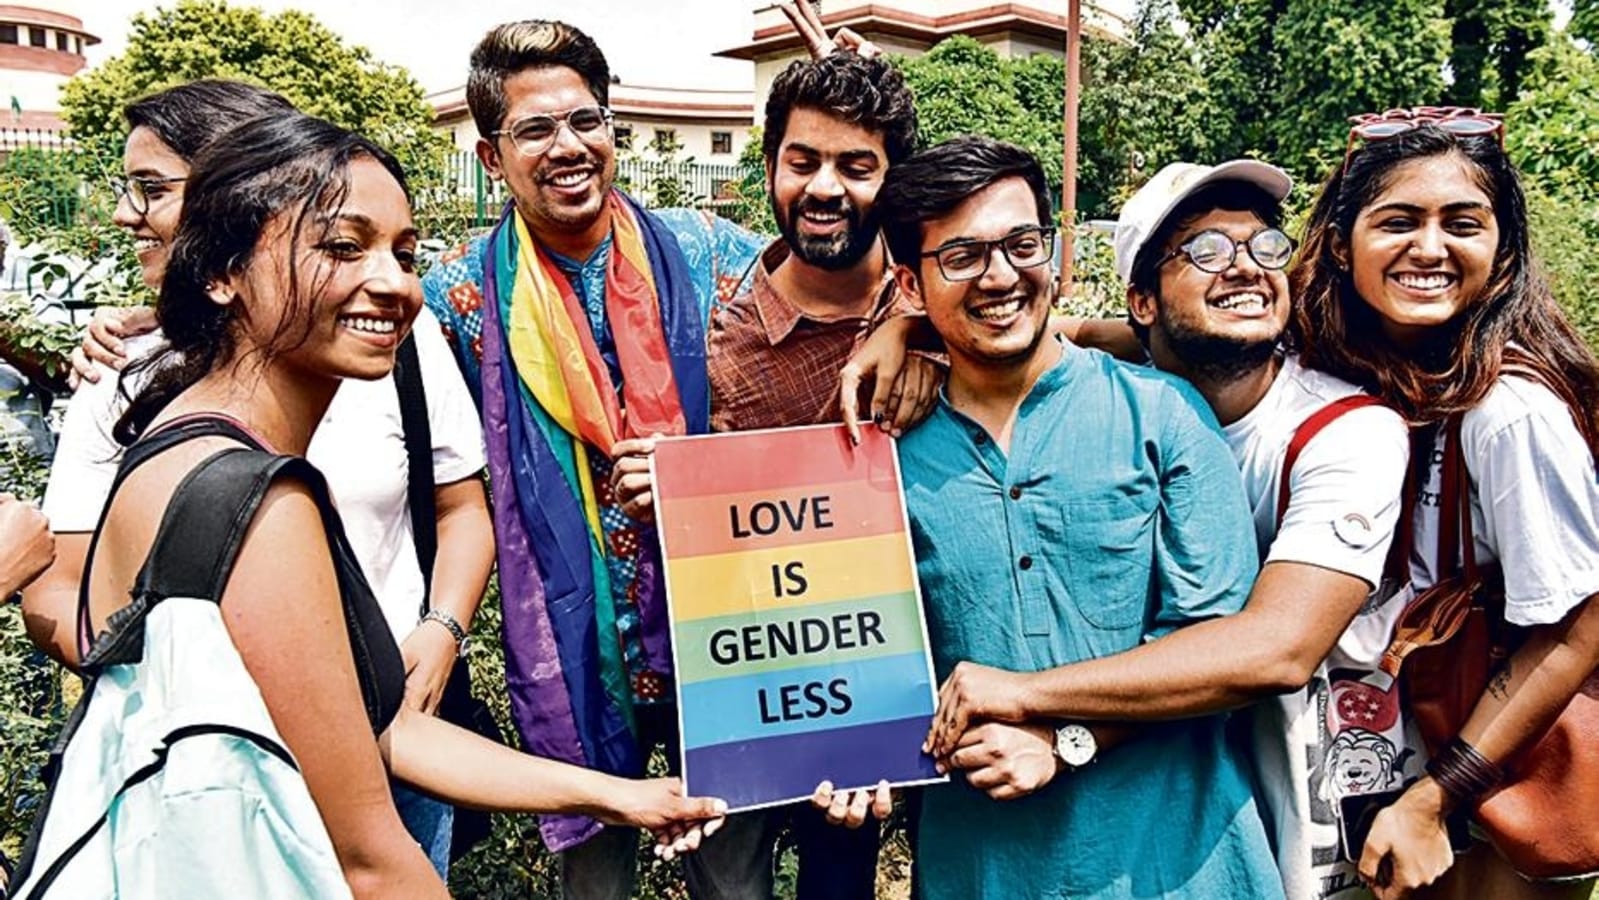 Section 377, 3 years on Freedom to love takes root Latest News India